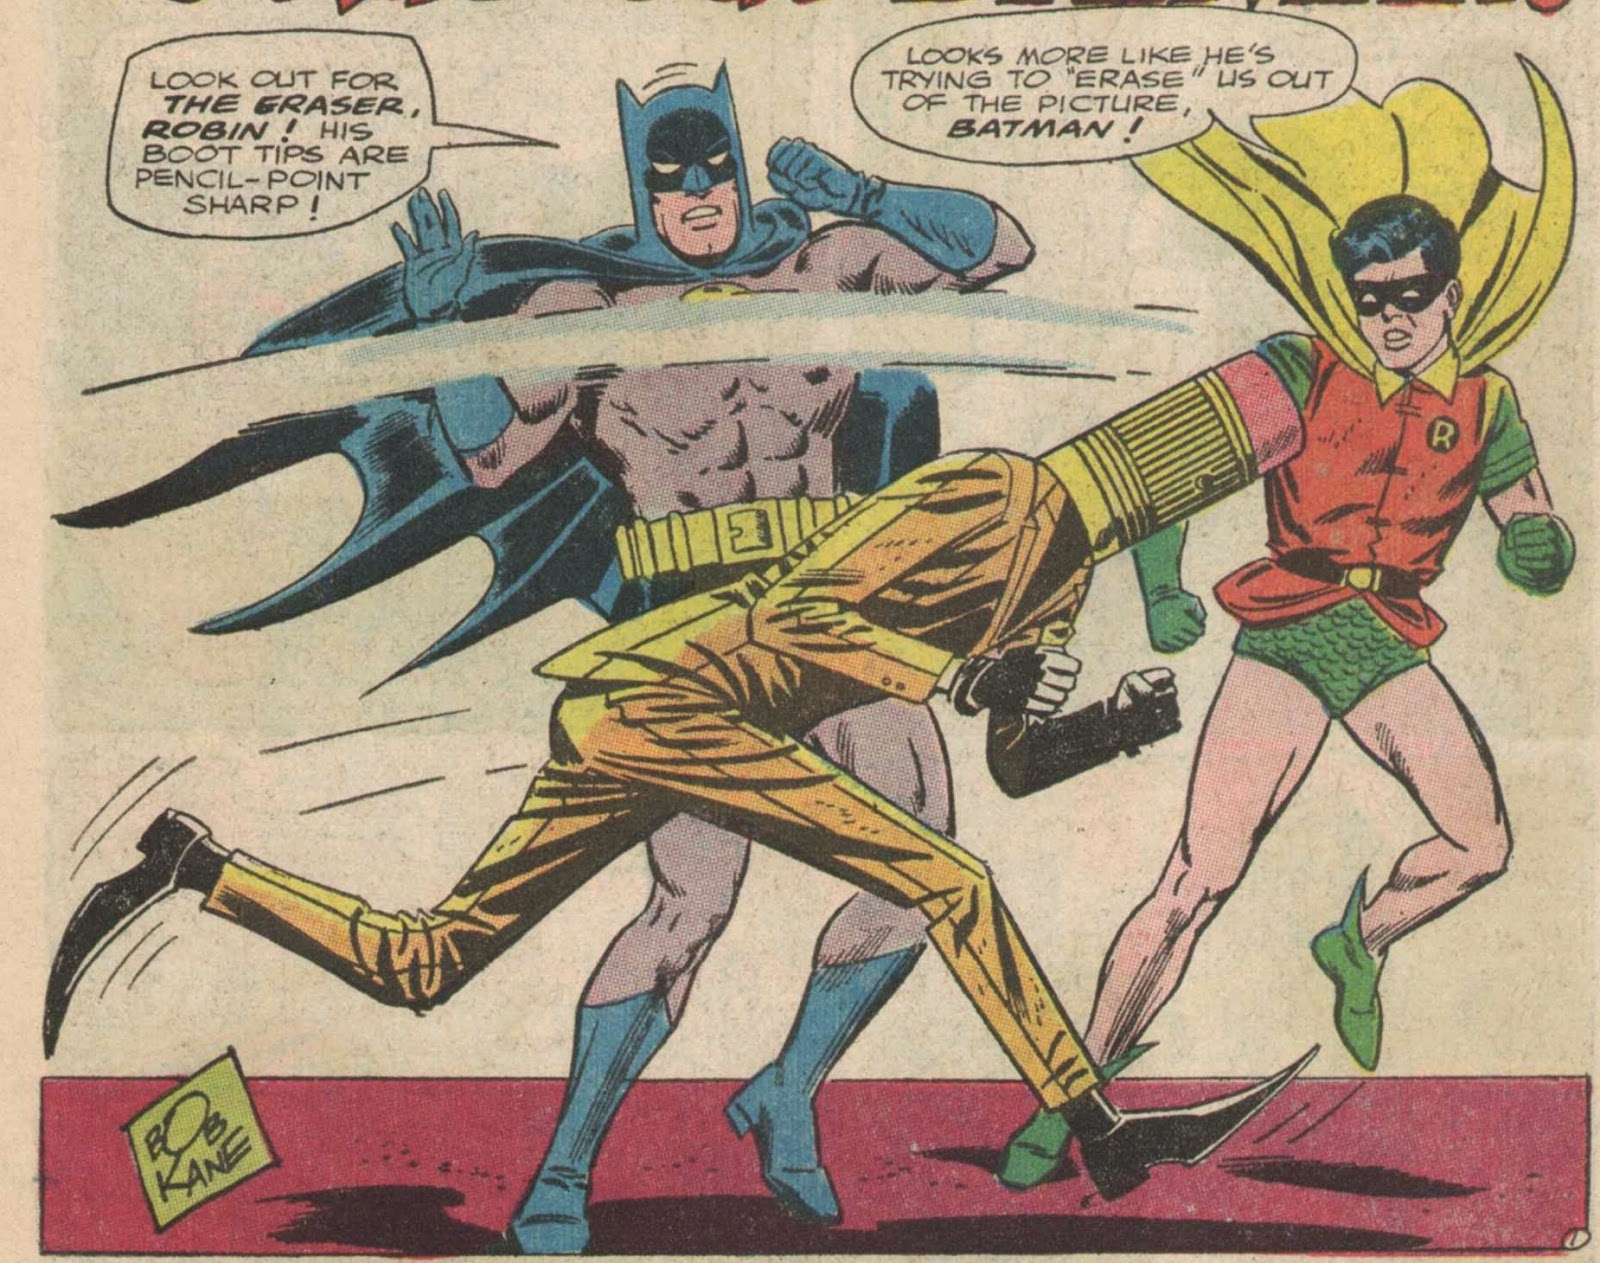 Comics Make No Sense: The Man Who Rubbed Out Batman... But Not in a Dirty  Way.